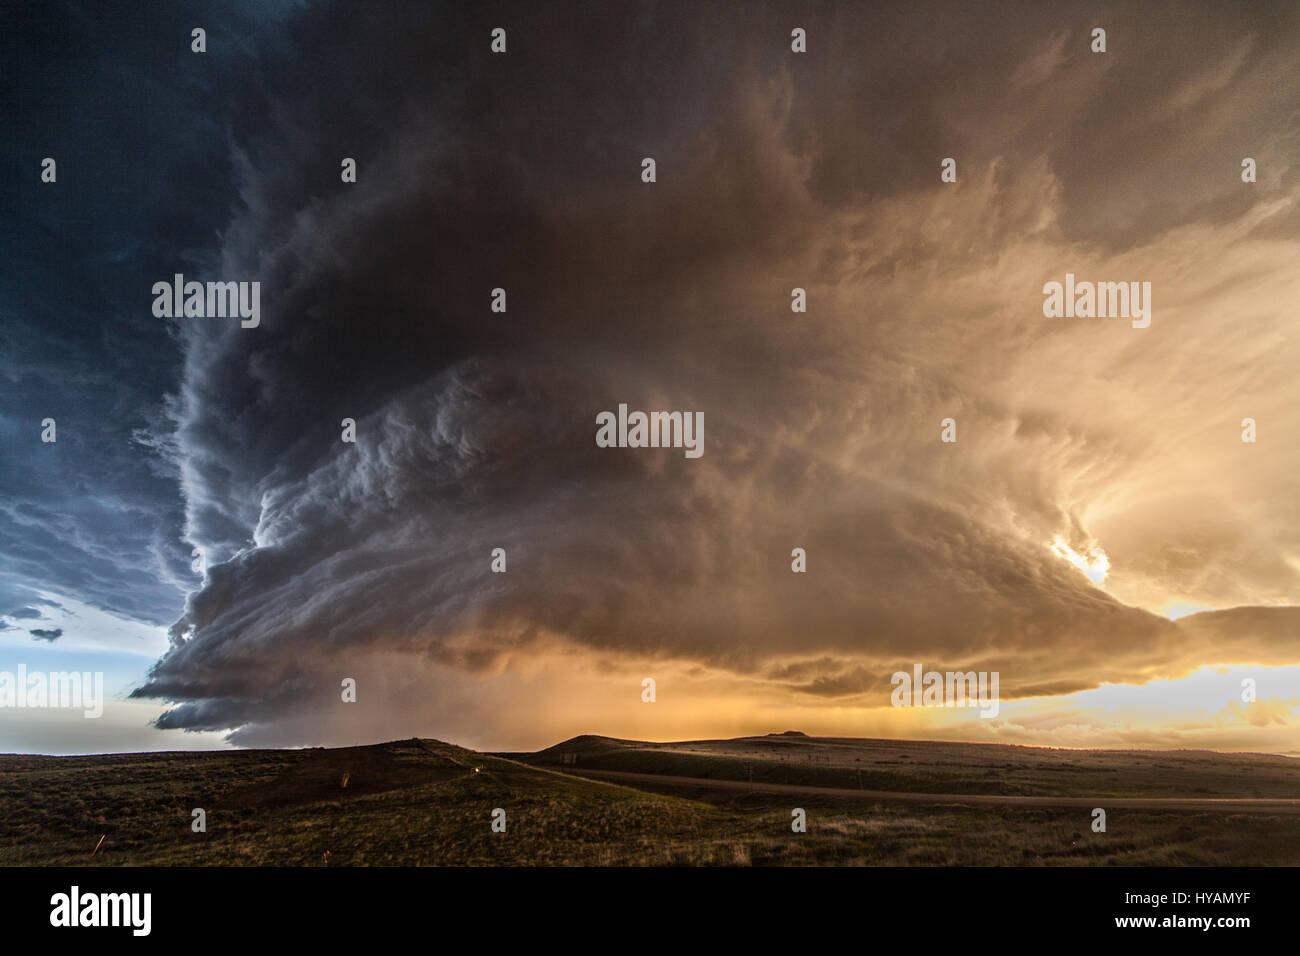 OKLAHOMA, USA: MEET THE female elementary teacher who was inspired by Hollywood film “Twister” and now risks her life to bring you these extraordinary photos of supercell thunderstorms and tornados. Pictures show how the 31-year-old Valentina Abinanti from Galliate, Italy battles winds of over 100-miles-per-hour, over her decade long stormchasing career, which has seen her encounter 70 tornados and four hundred storms. On May 31st 2013, Valentina even survived one deadly tornado, El Reno, the widest in recorded history, which killed three fellow stormchasers and is remembered by the community  Stock Photo